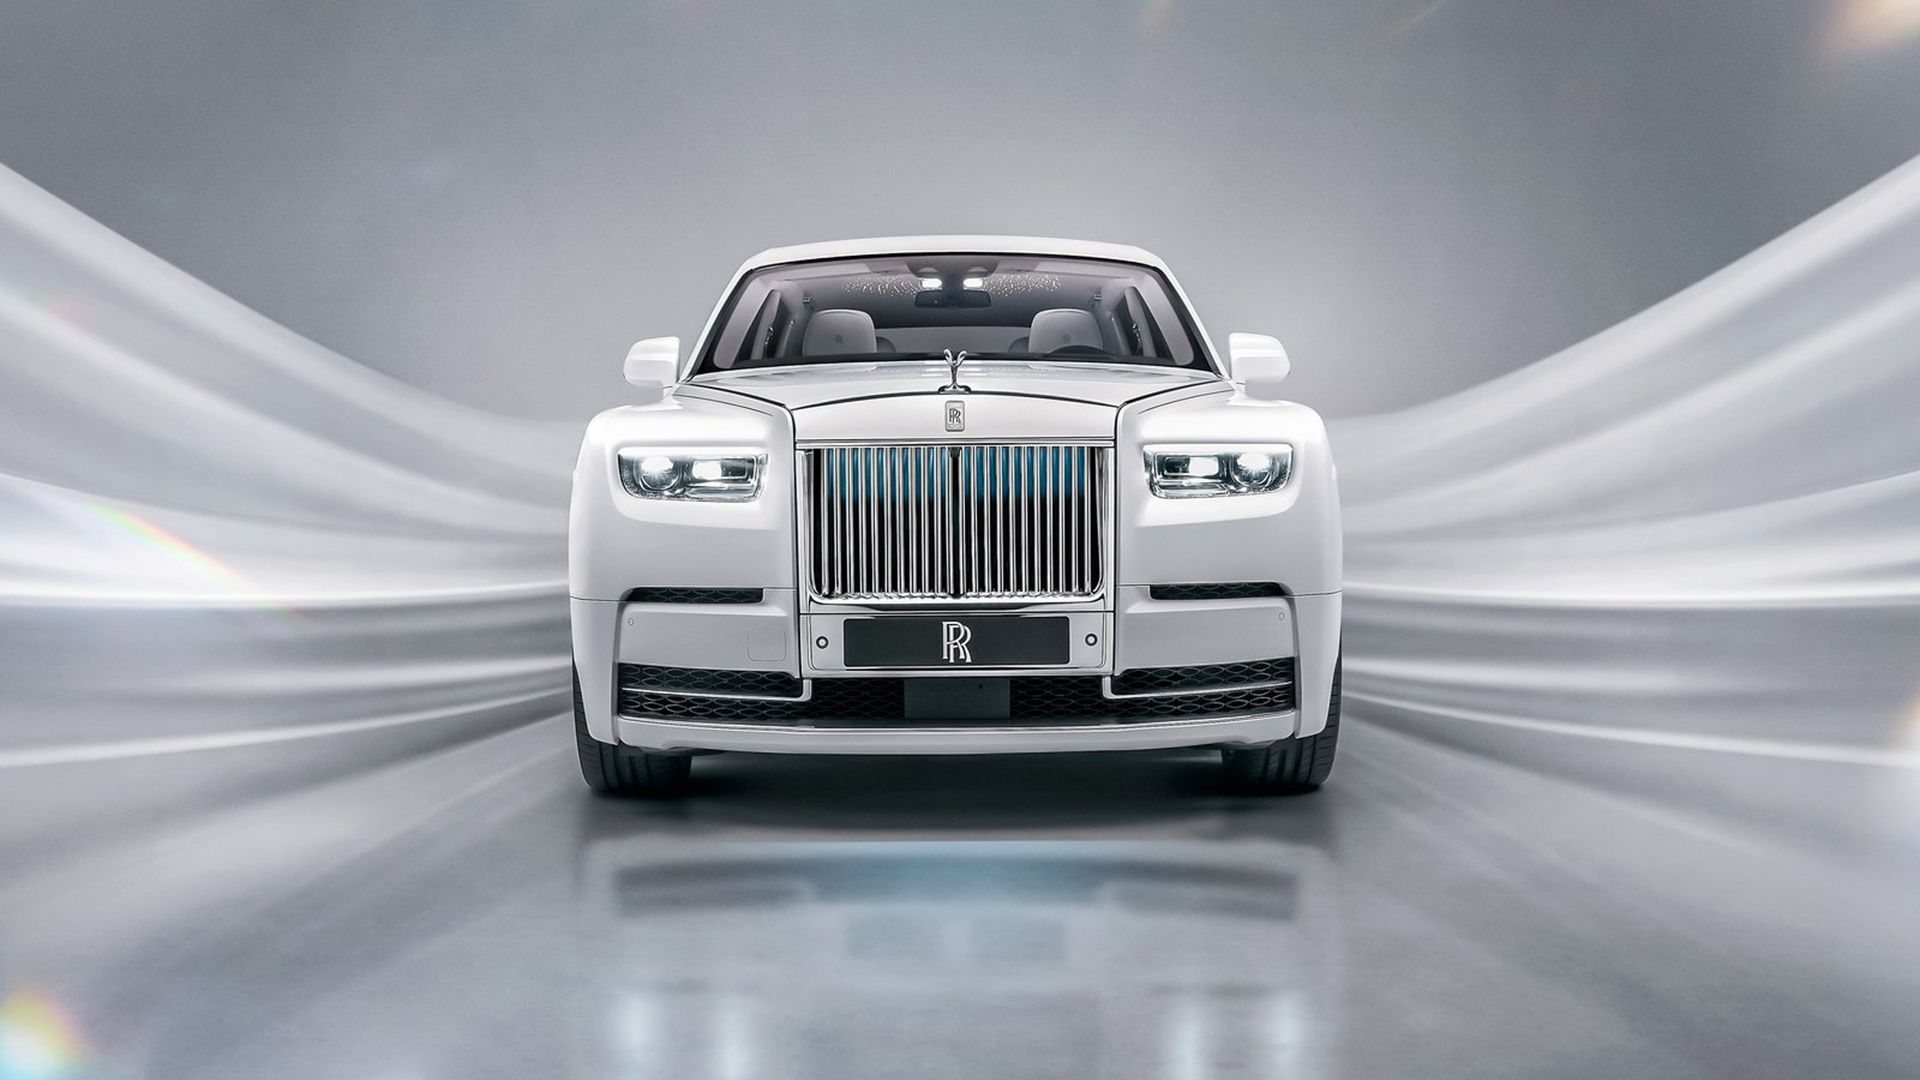 Front view of a 2023 Rolls-Royce Phantom Extended Series II in a studio